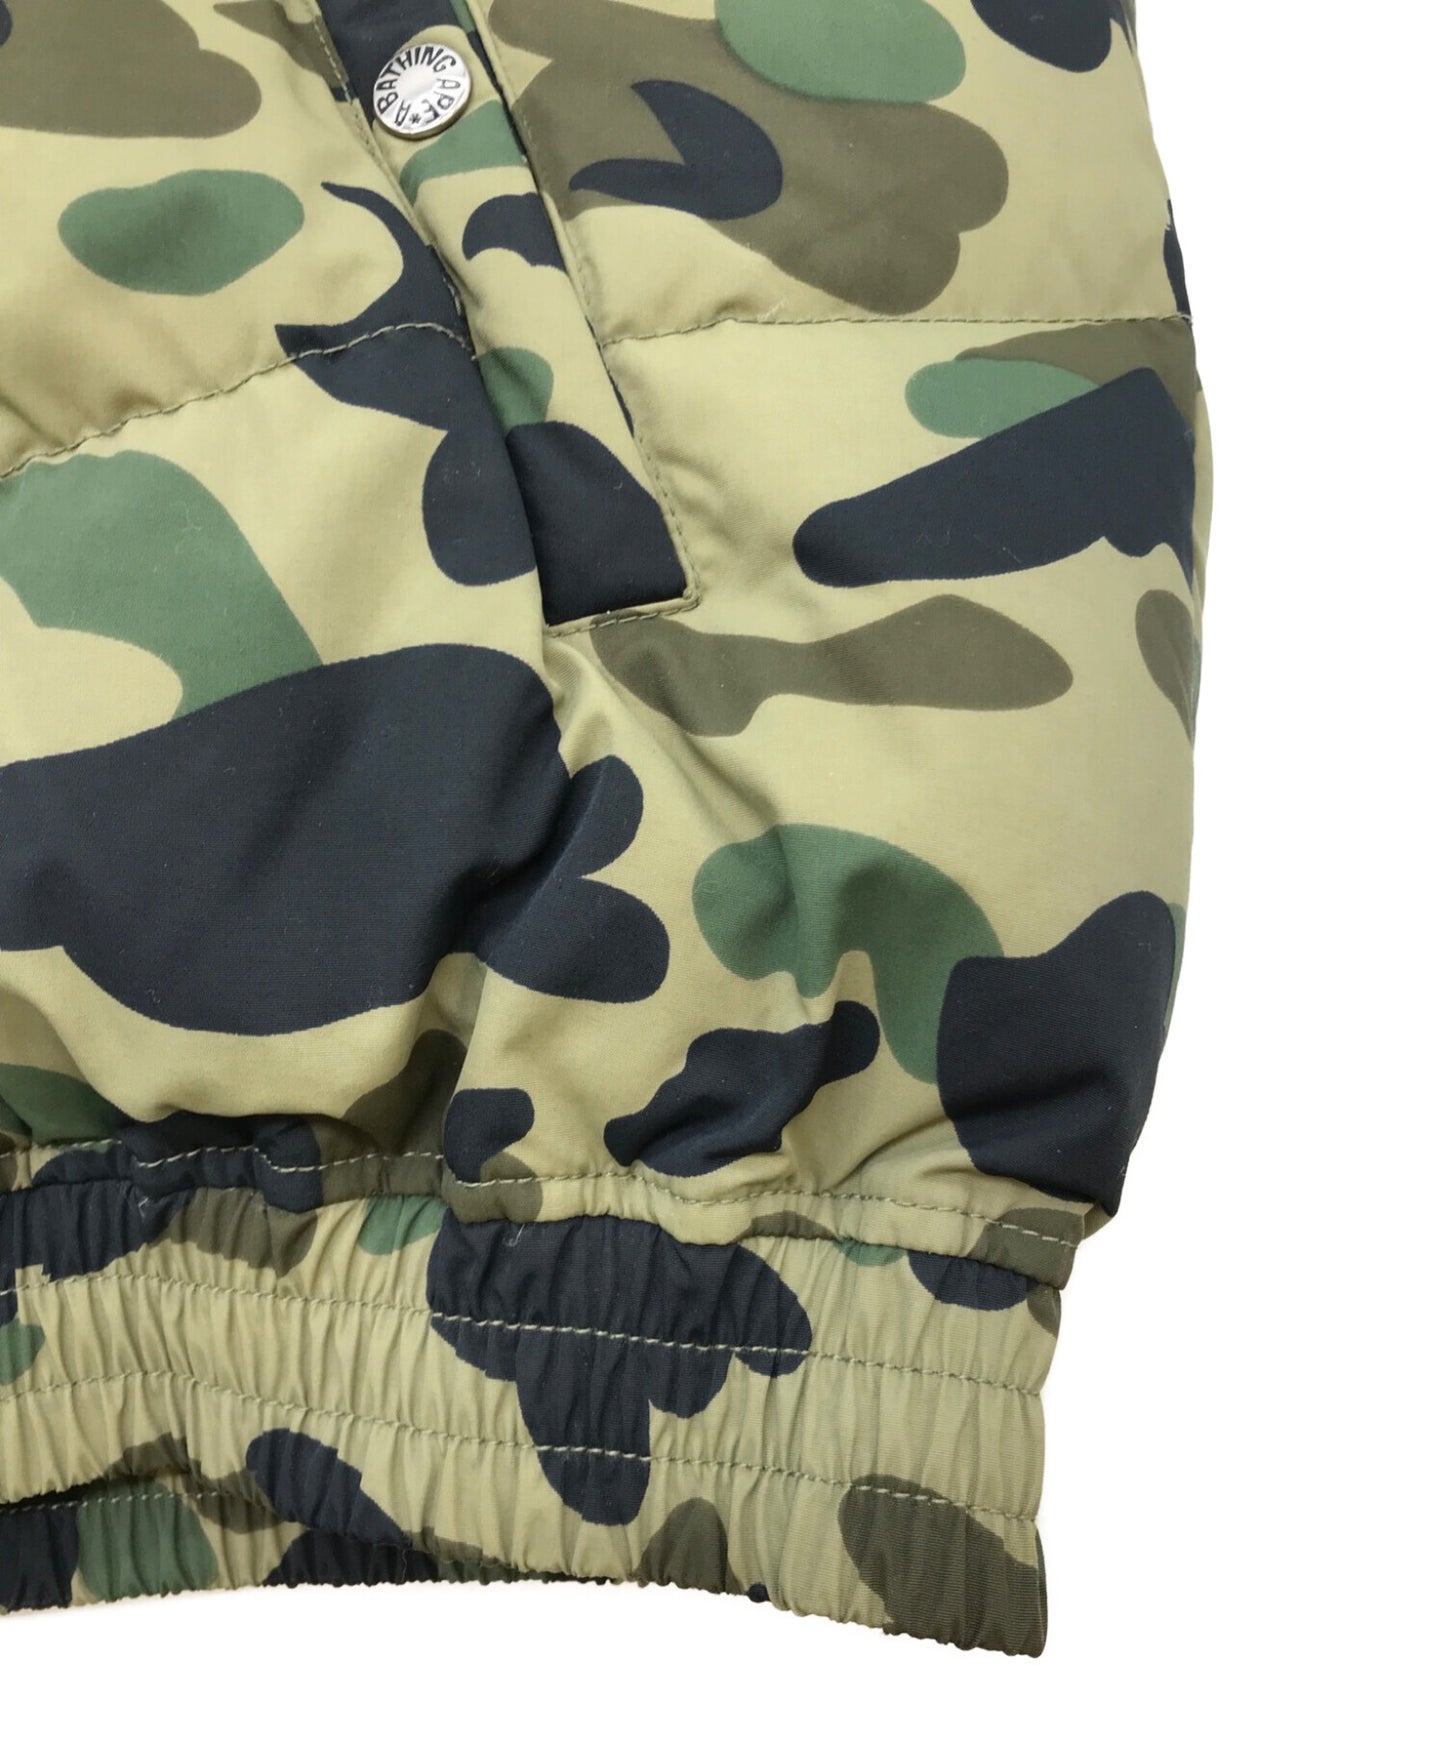 [Pre-owned] A BATHING APE 1st Camo Down Jacket